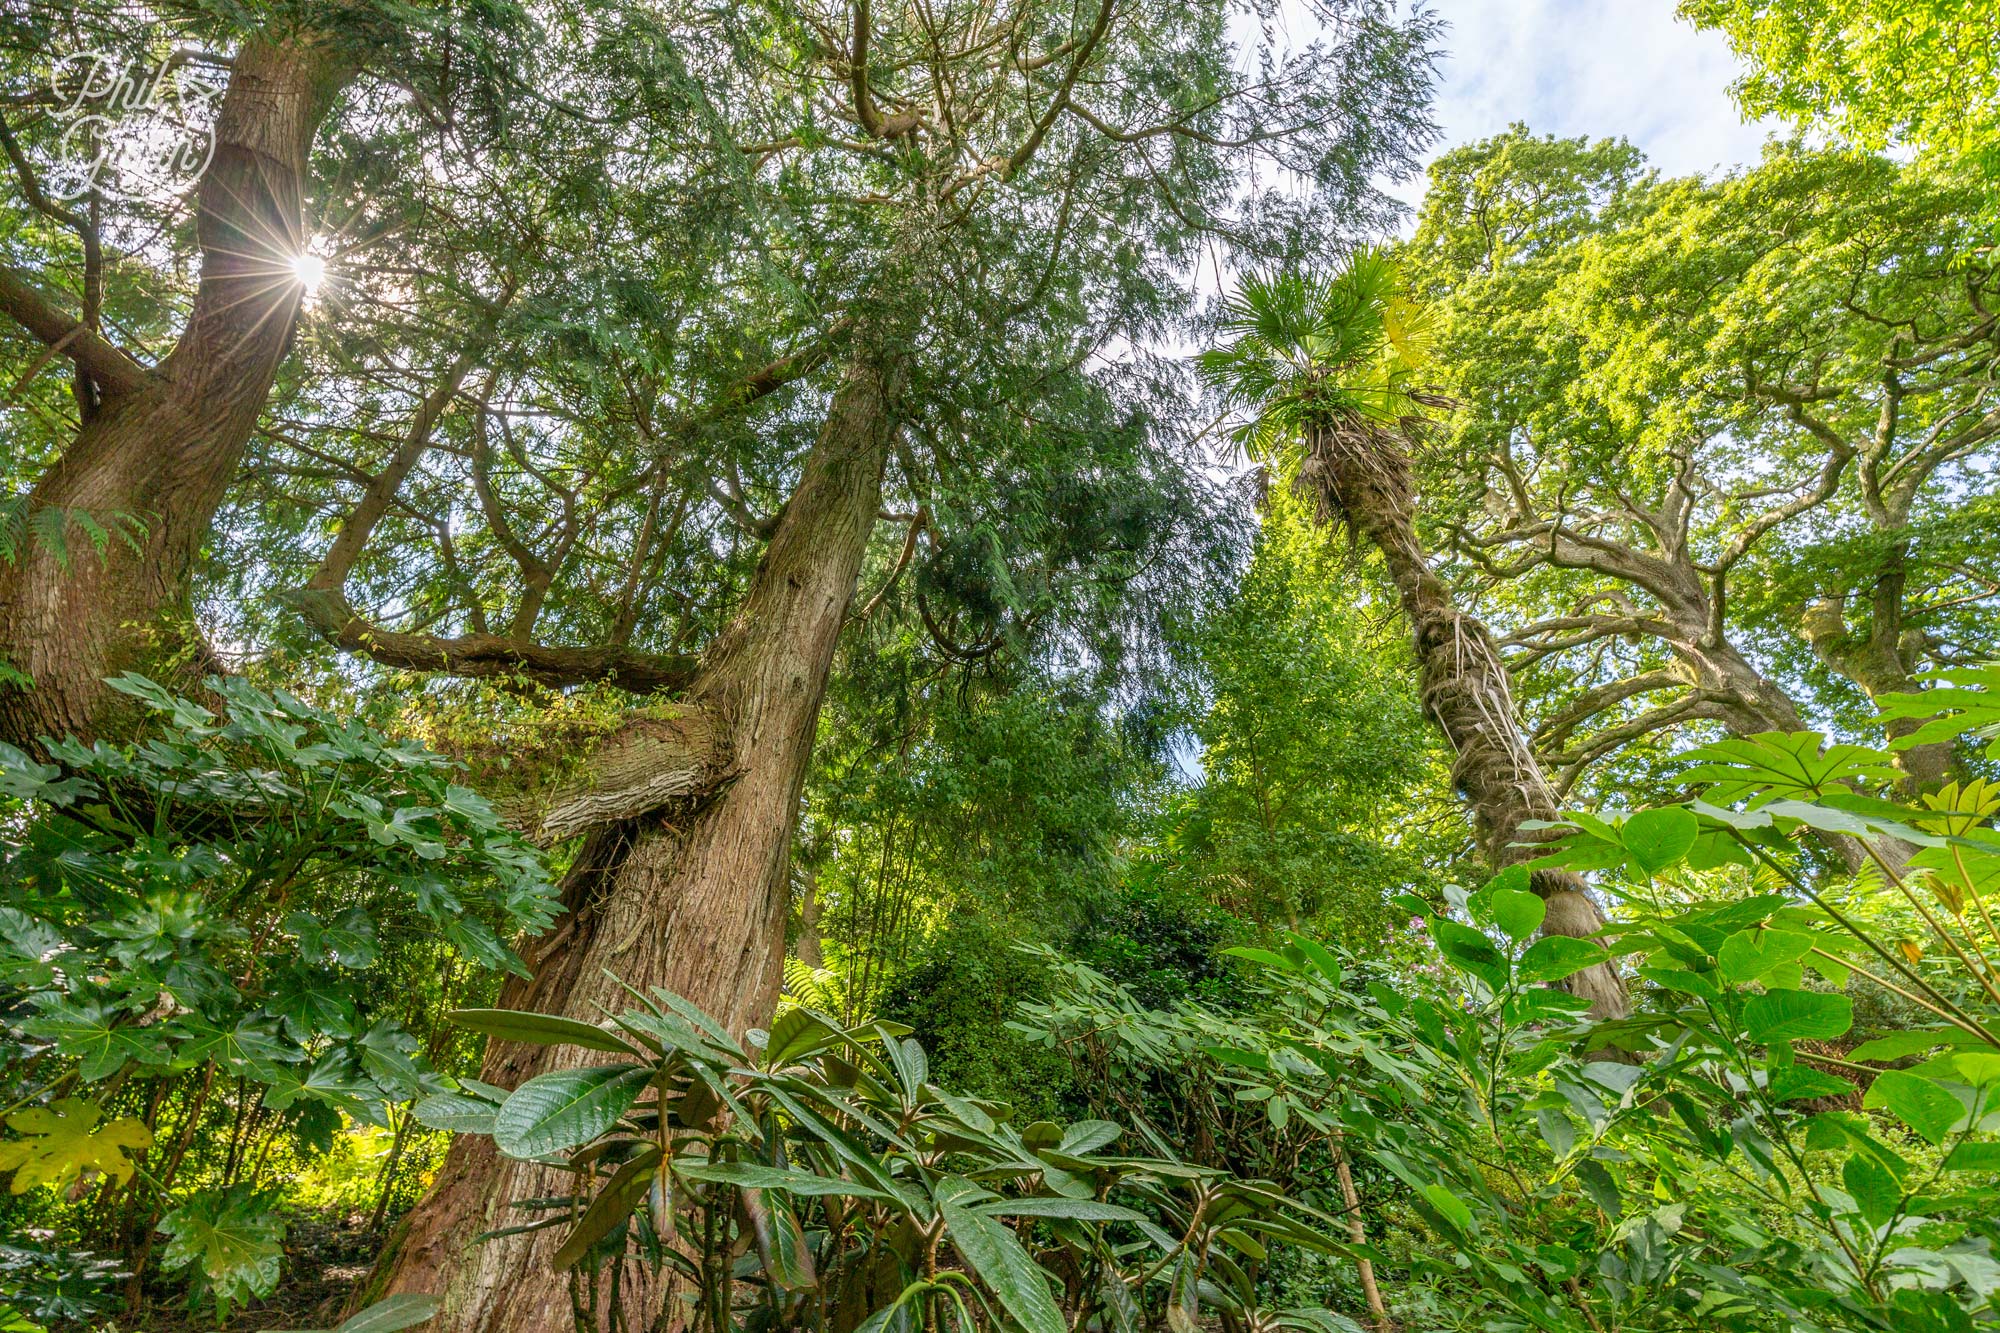 Looking up to the sky from the Jungle valley at the Lost Gardens of Heligan